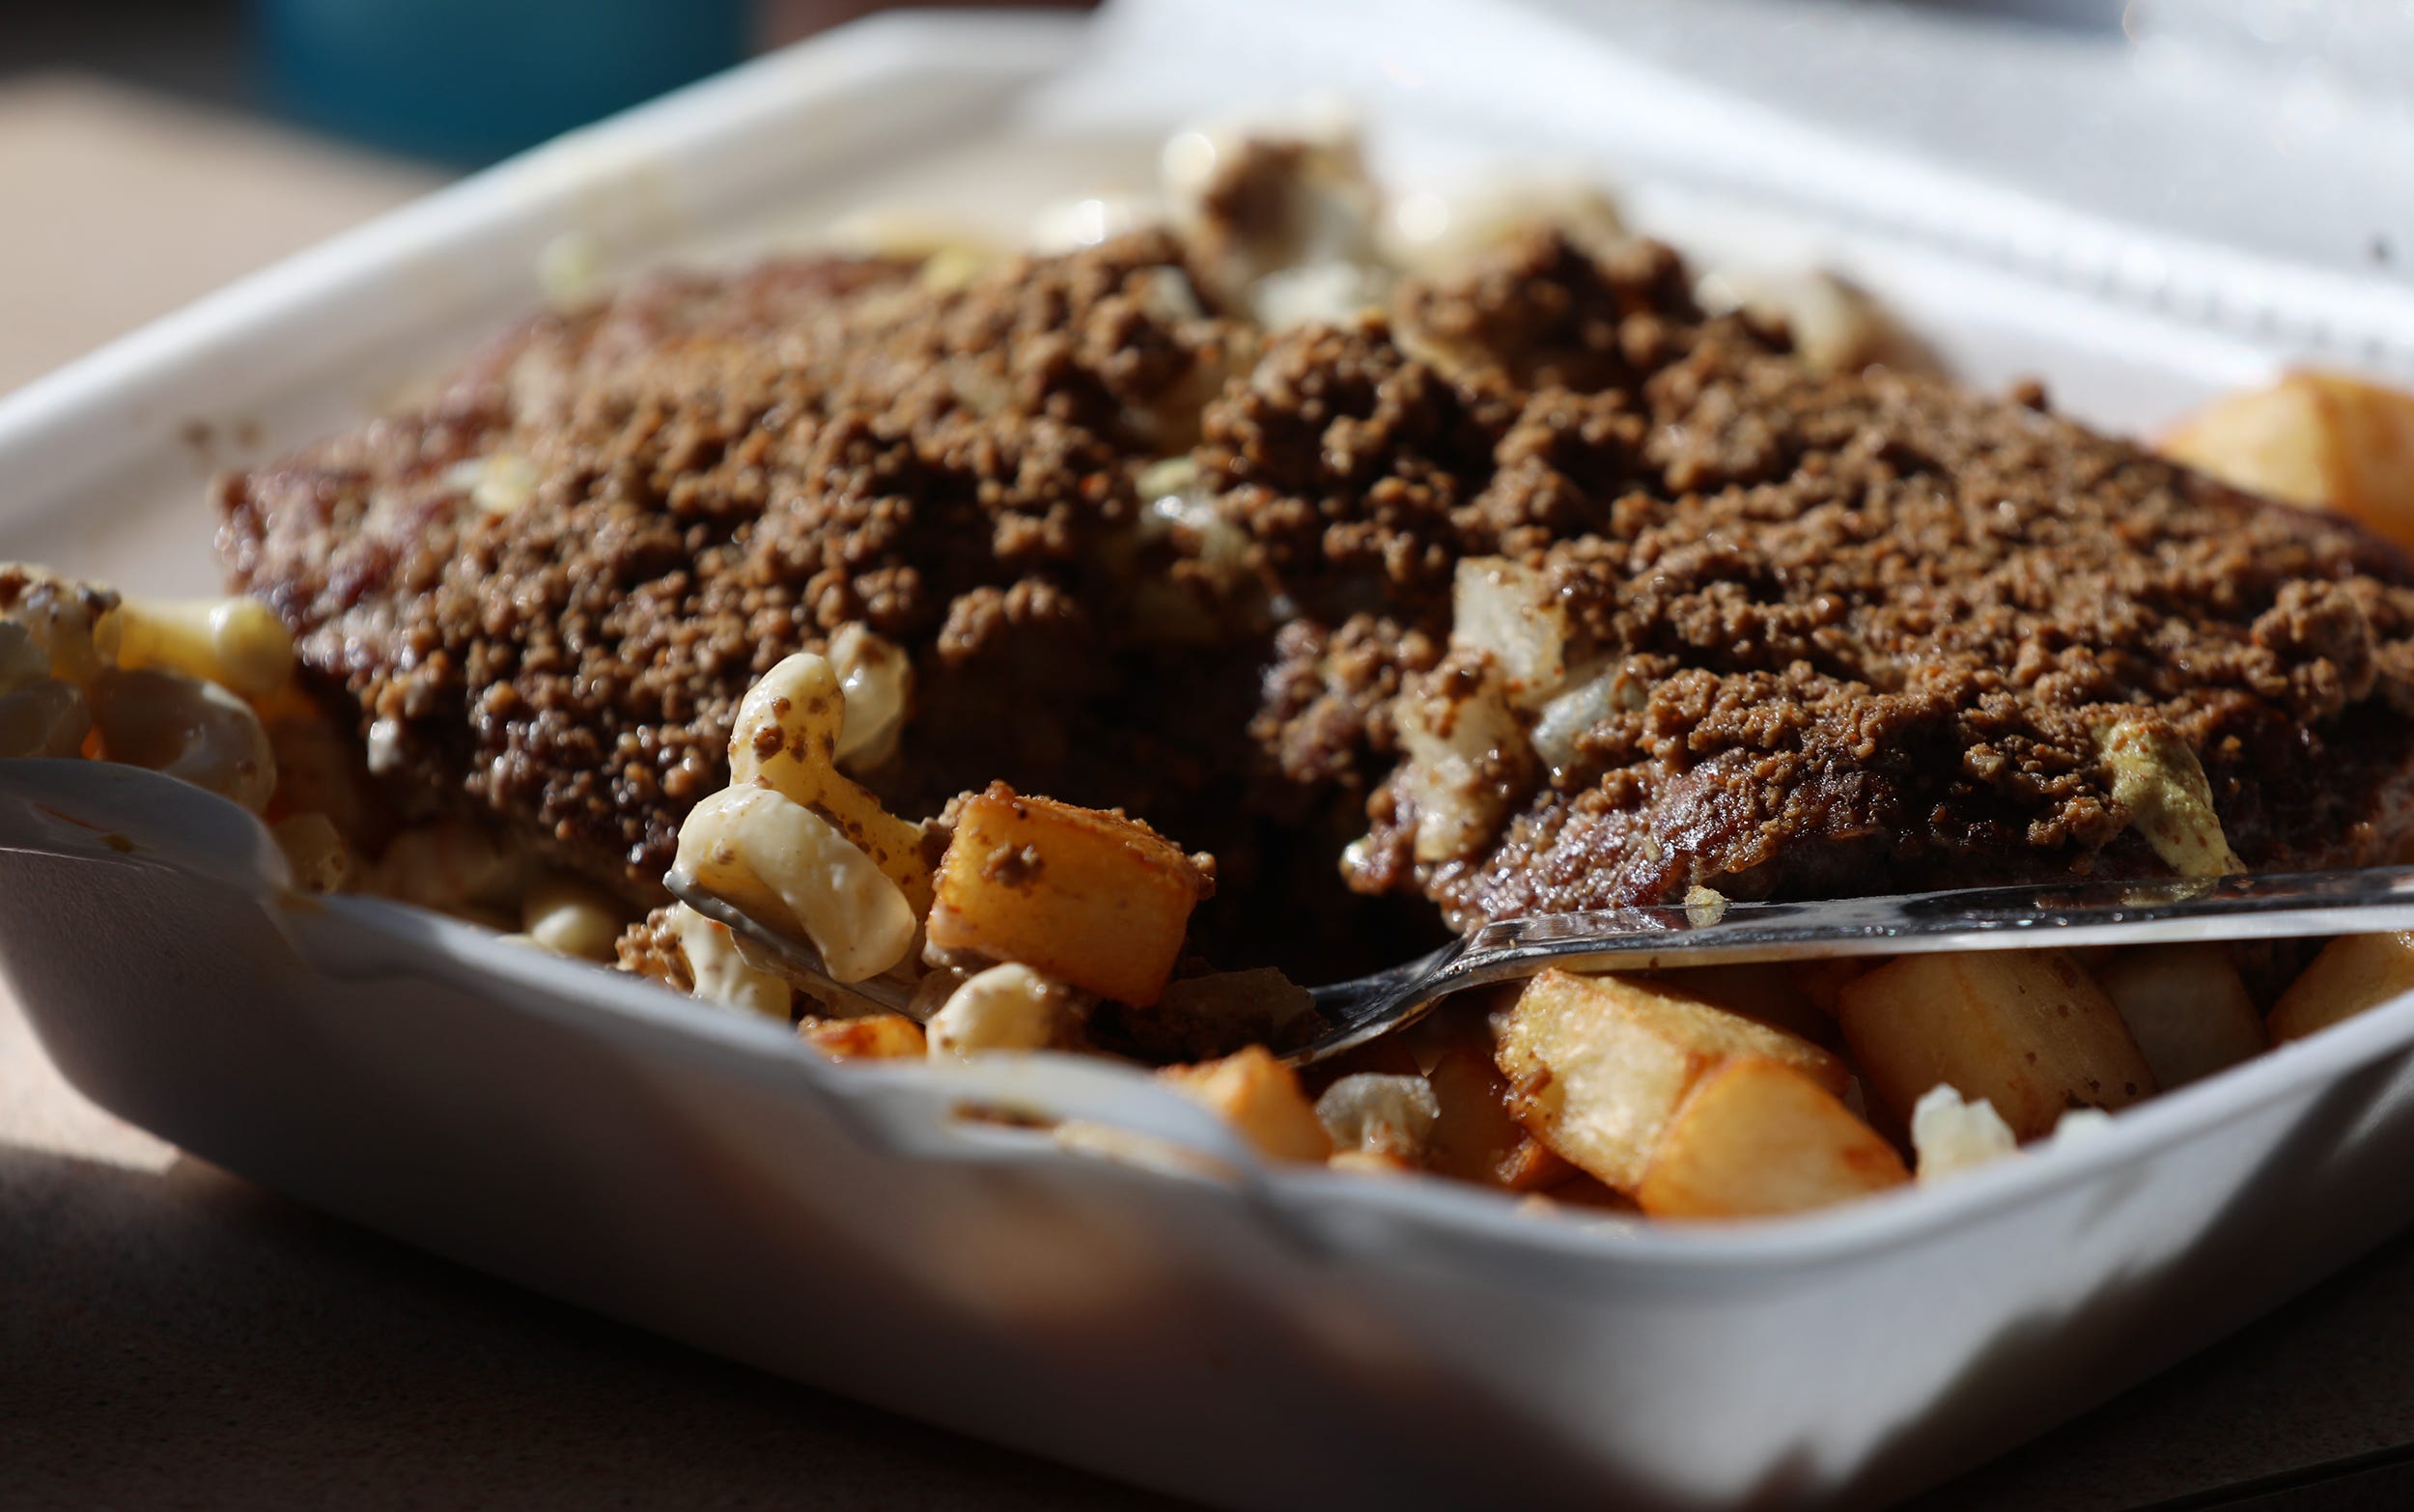 Nick Tahou Hots is famous for inventing the Garbage Plate. This is a Hamburger Garbage Plate with everything, including two hamburgers, hot sauce, macaroni salad, home fries, onions and mustard.